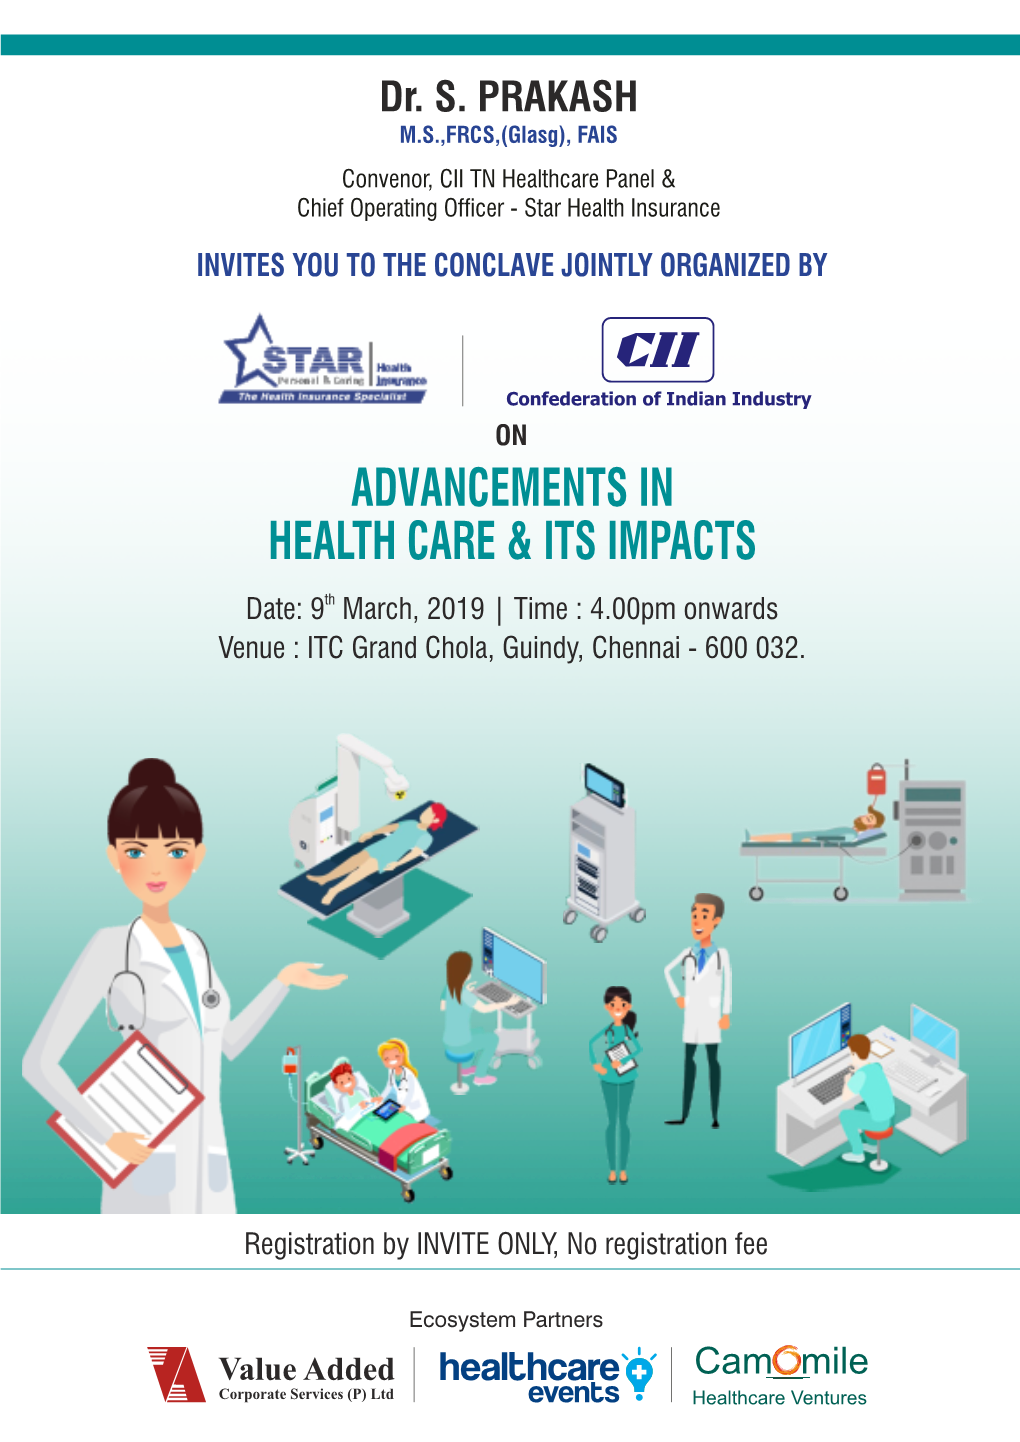 Advancements in Health Care & Its Impacts